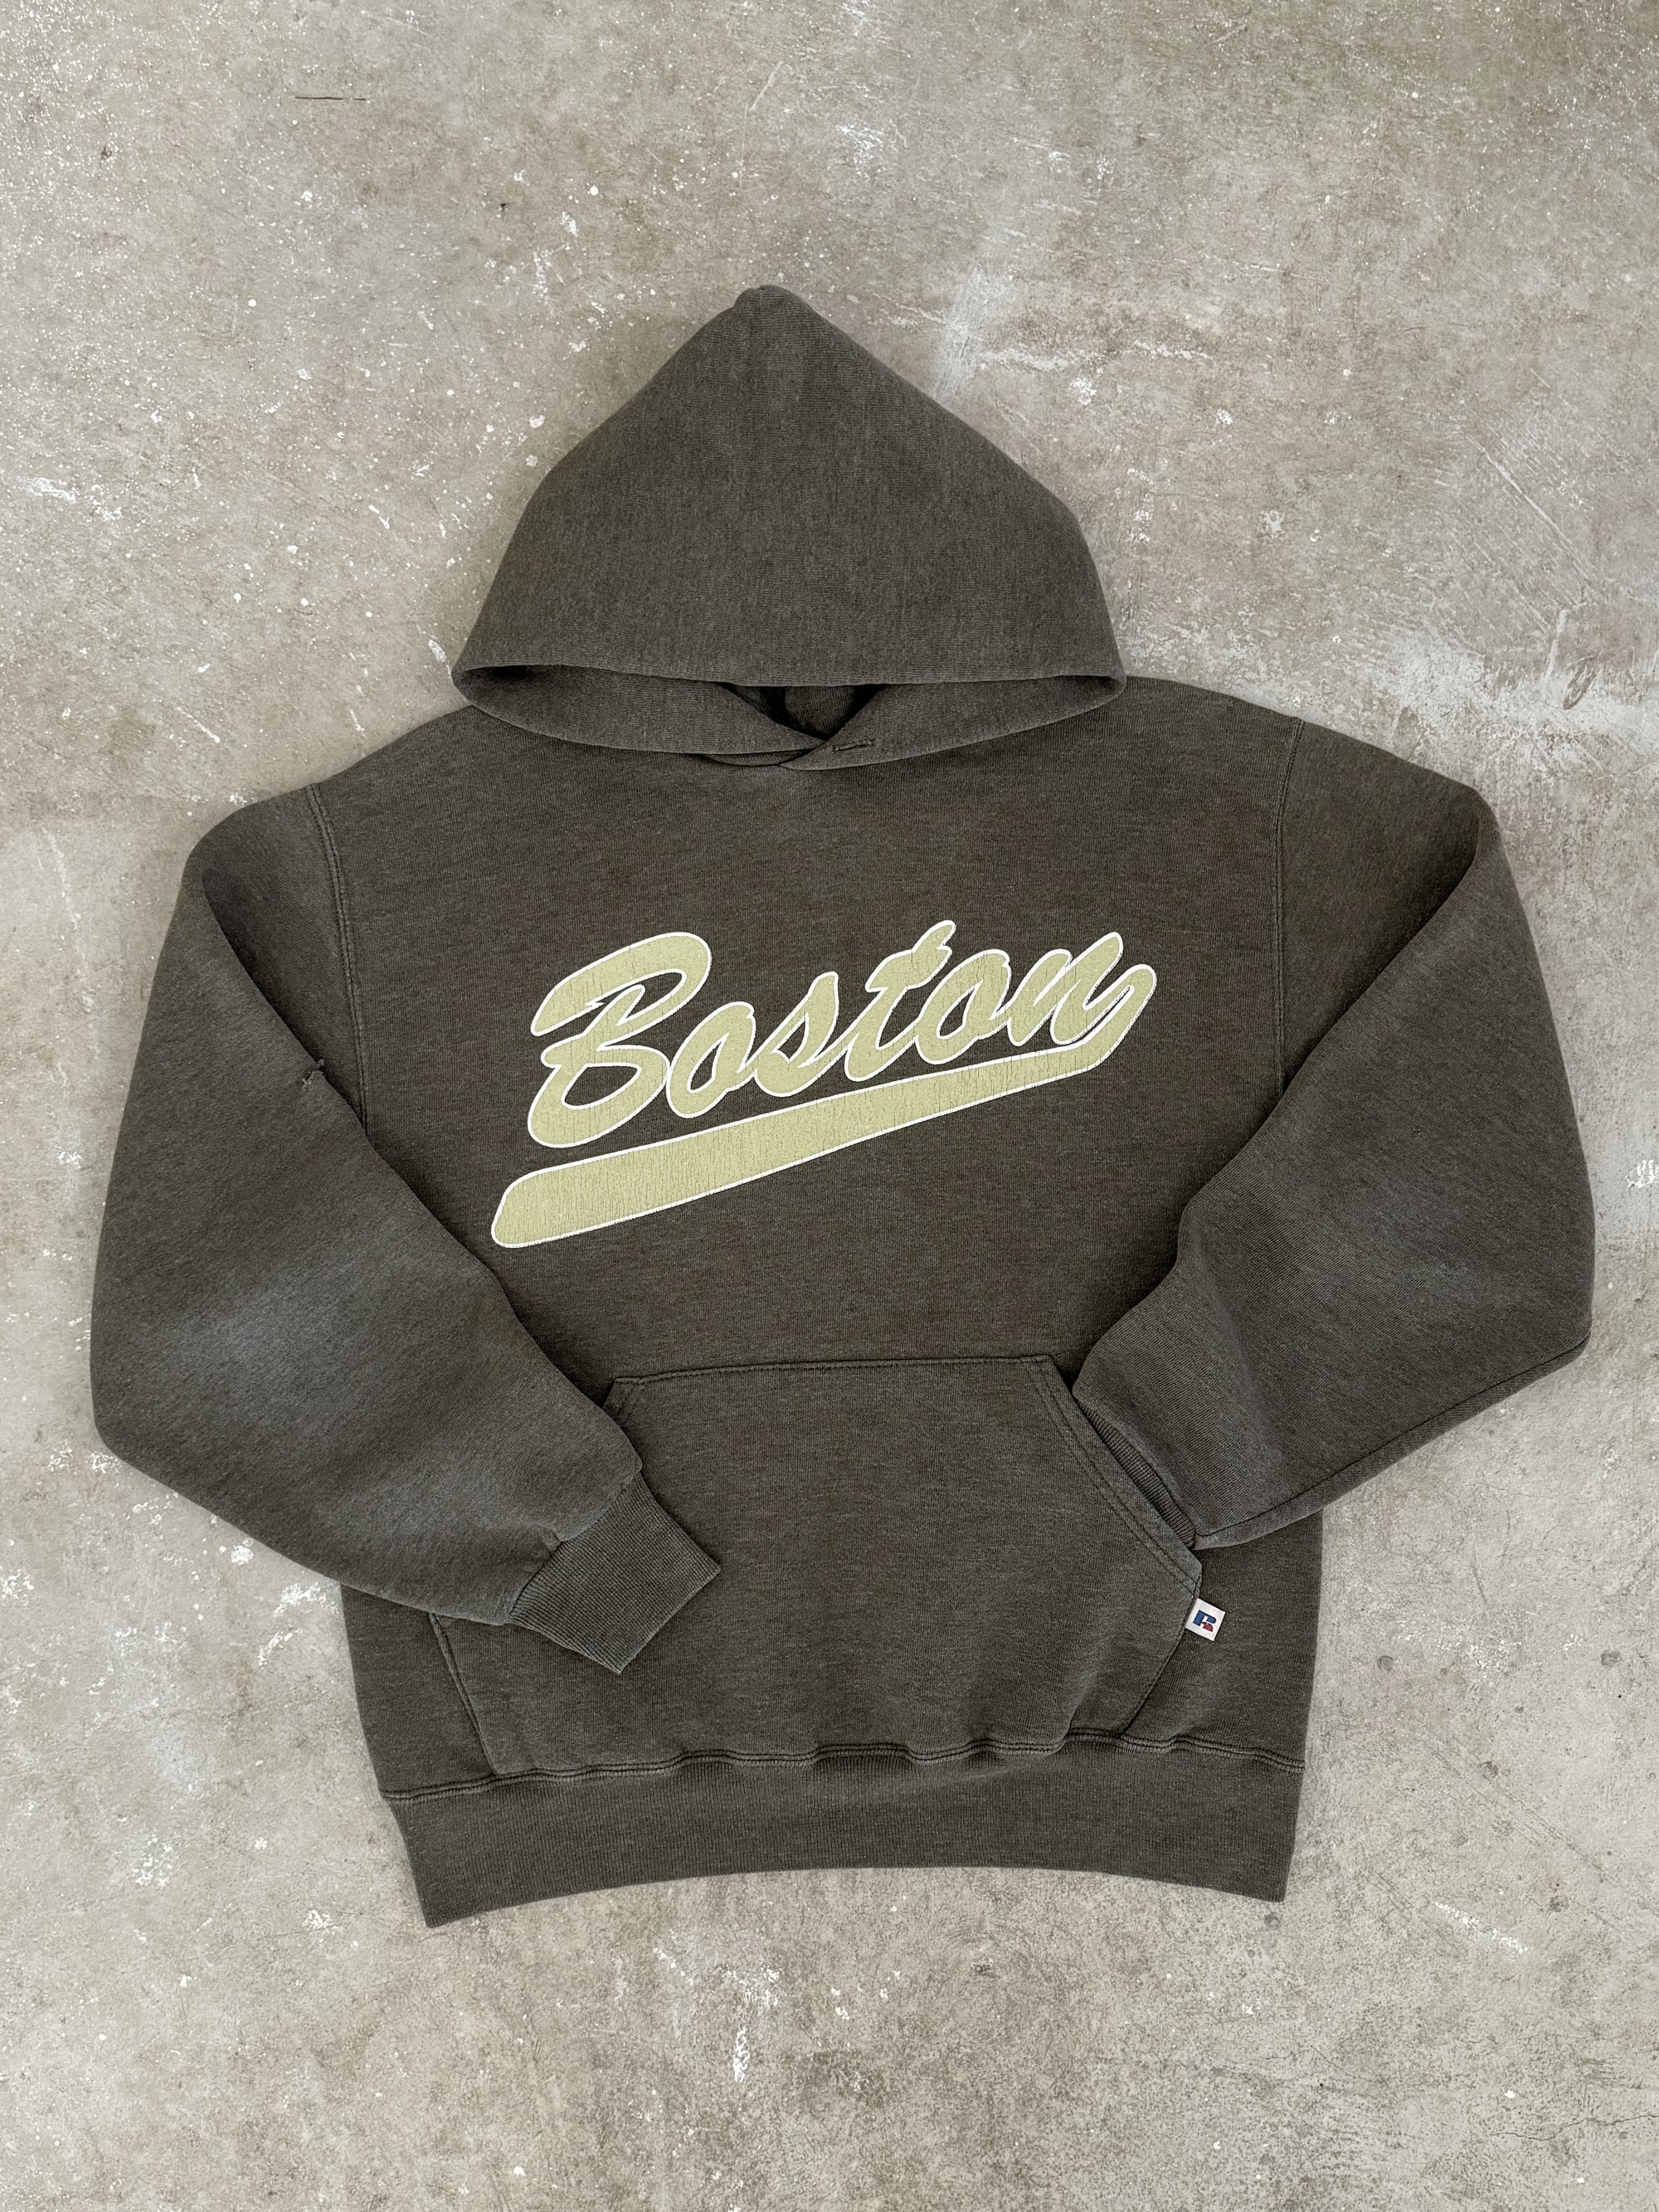 Early 00s Russell "Boston" Hoodie (S)